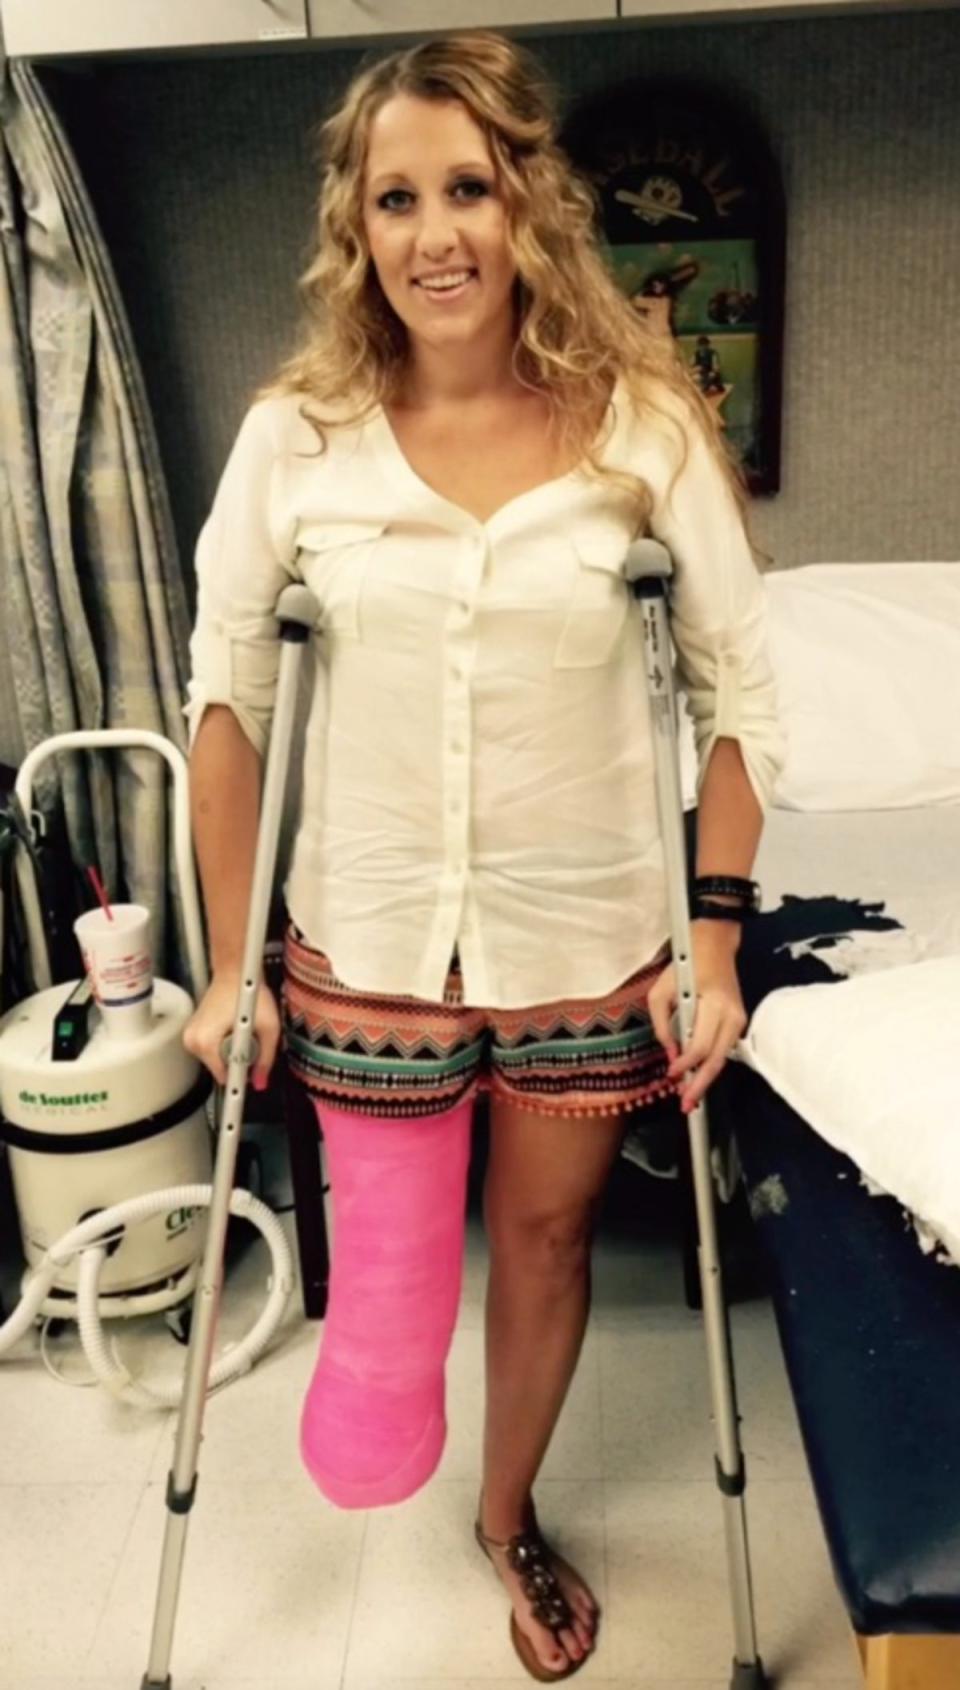 Angie Fowler had her leg amputated after contracting a bacterial infection (Jam Press Vid/@amputeeangie)